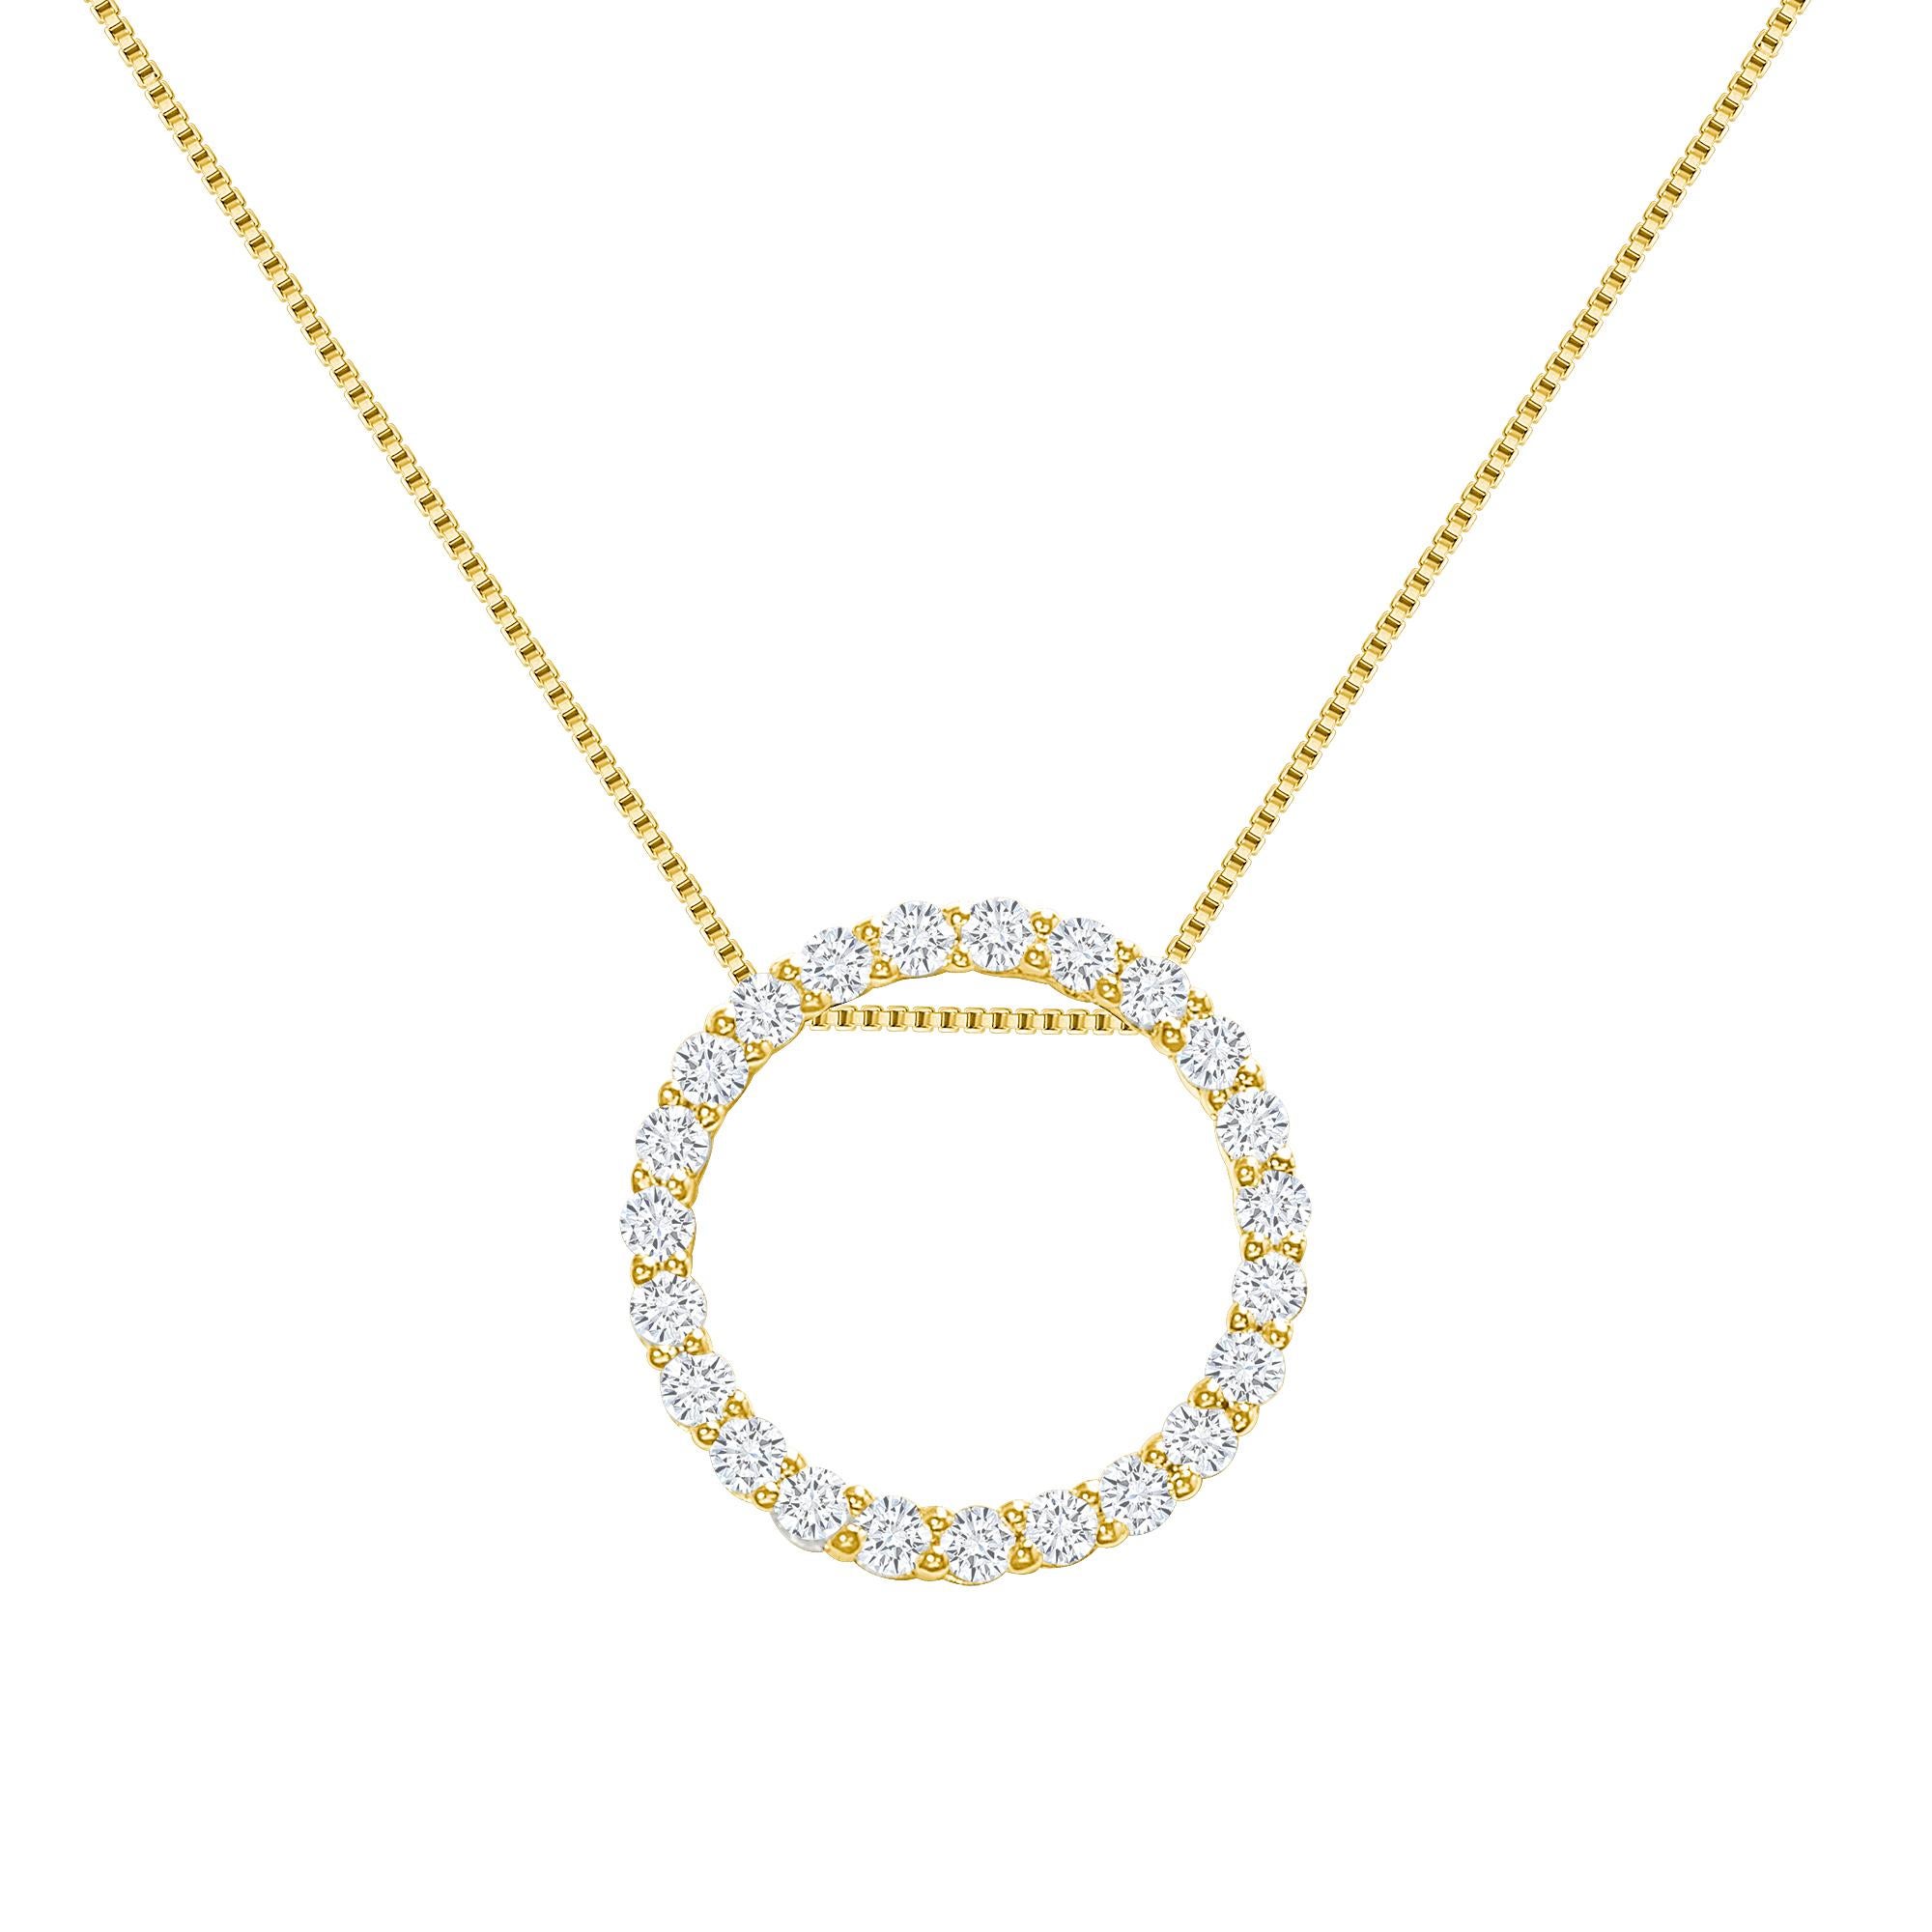 This diamond circle pendant provides a glowing chic look.
Metal: 14k Gold
Diamond Total Carats: 1 carat
Diamond Cut: Round Natural Diamonds (Not Lab Grown)
Diamond Clarity: VS
Diamond Color: F-G
Color: Yellow Gold
Necklace Length: 20 inches